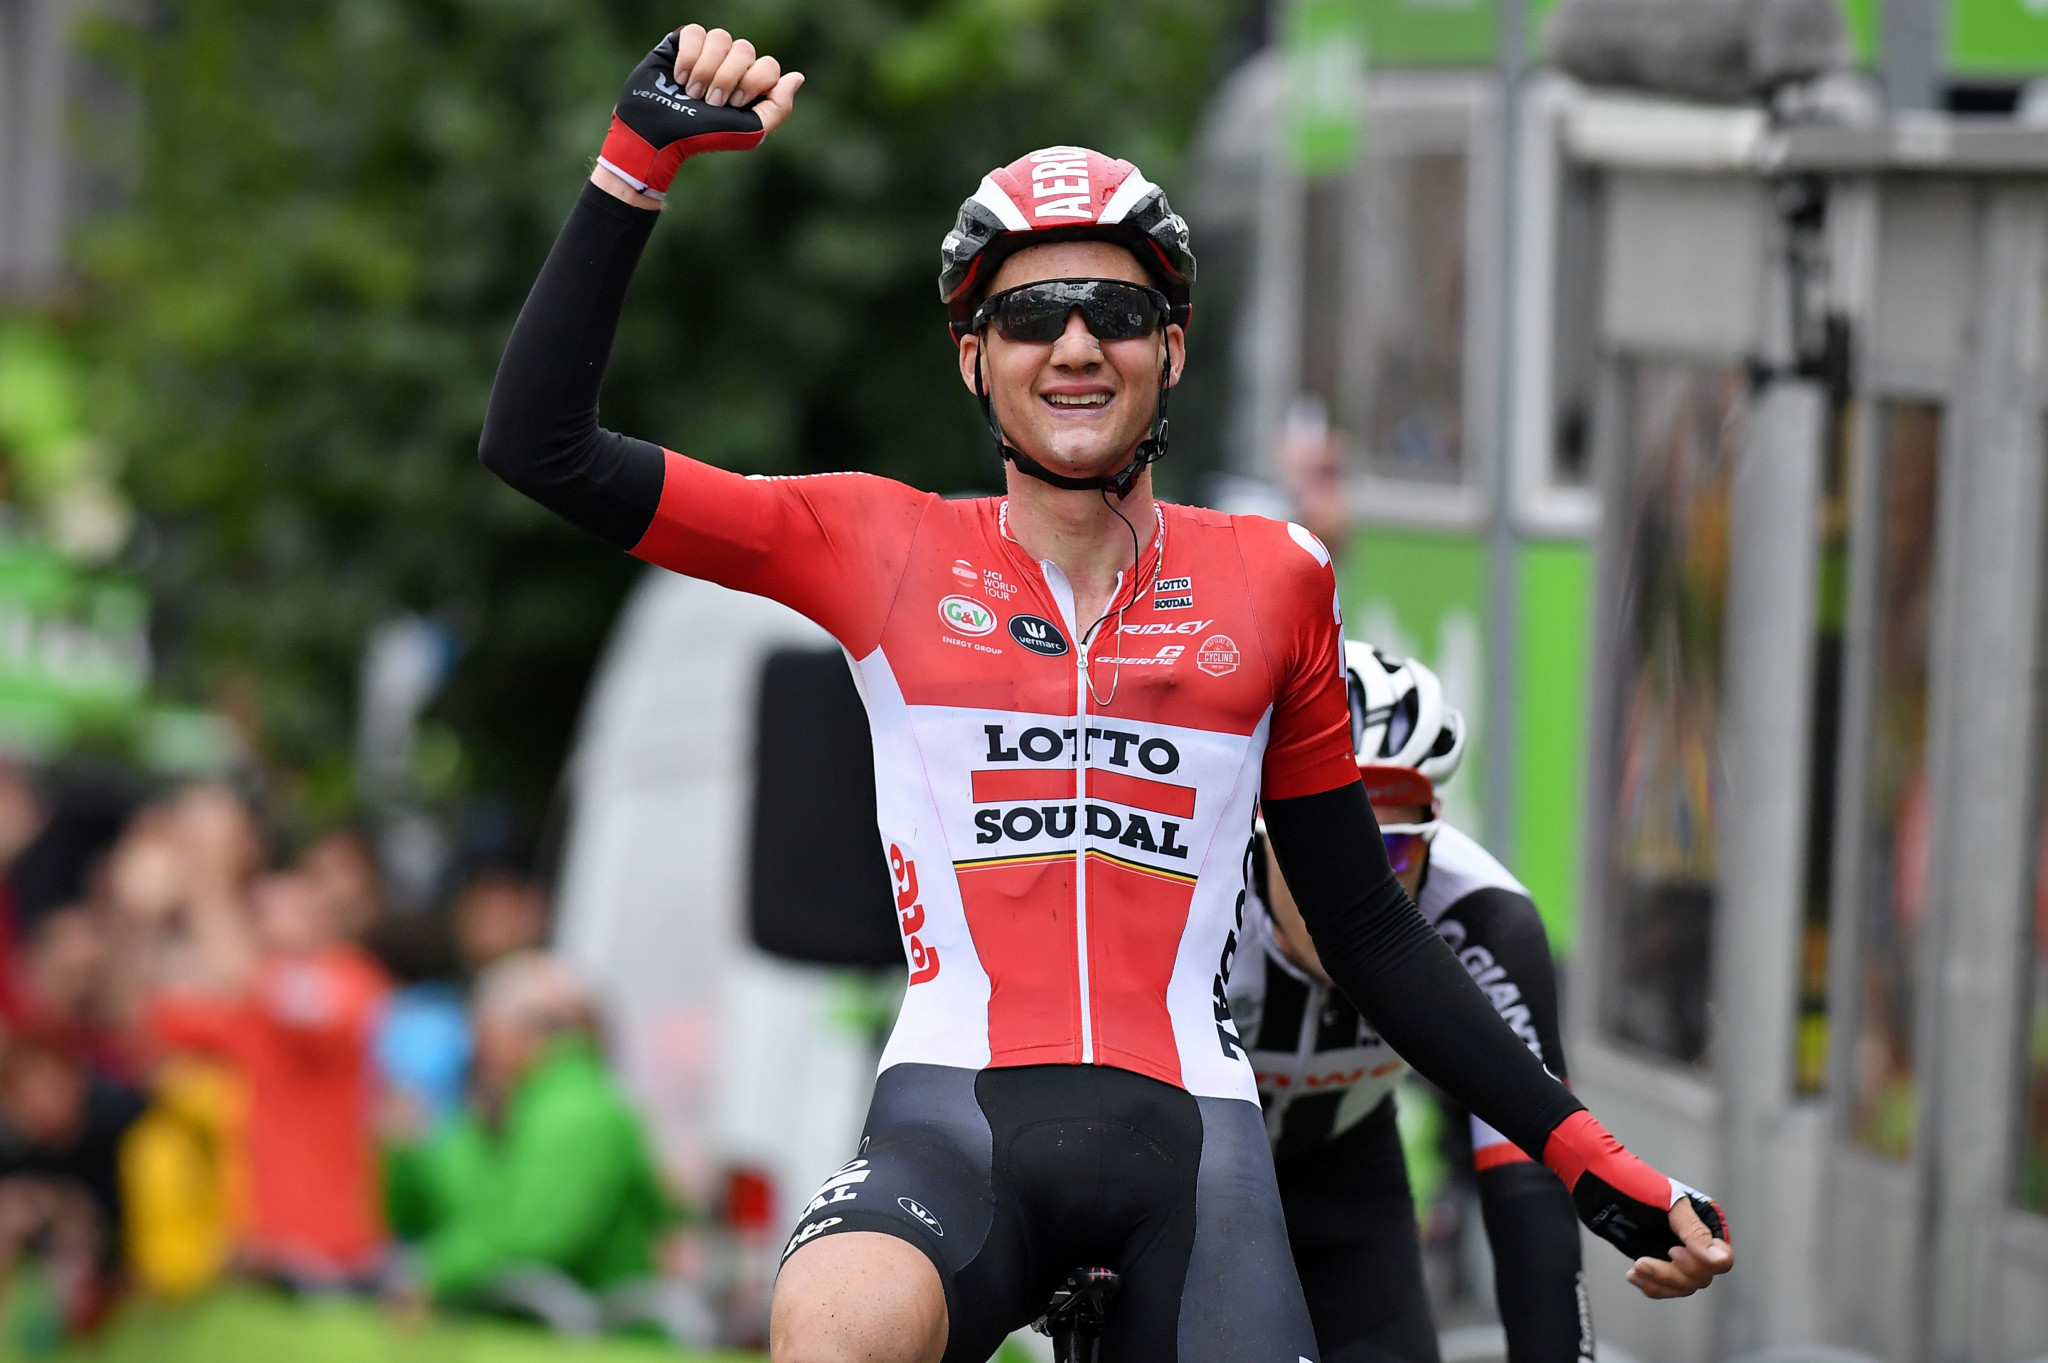 Belgian rider Tim Wellens took the overall lead as he claimed a narrow stage four victory ©Getty Images